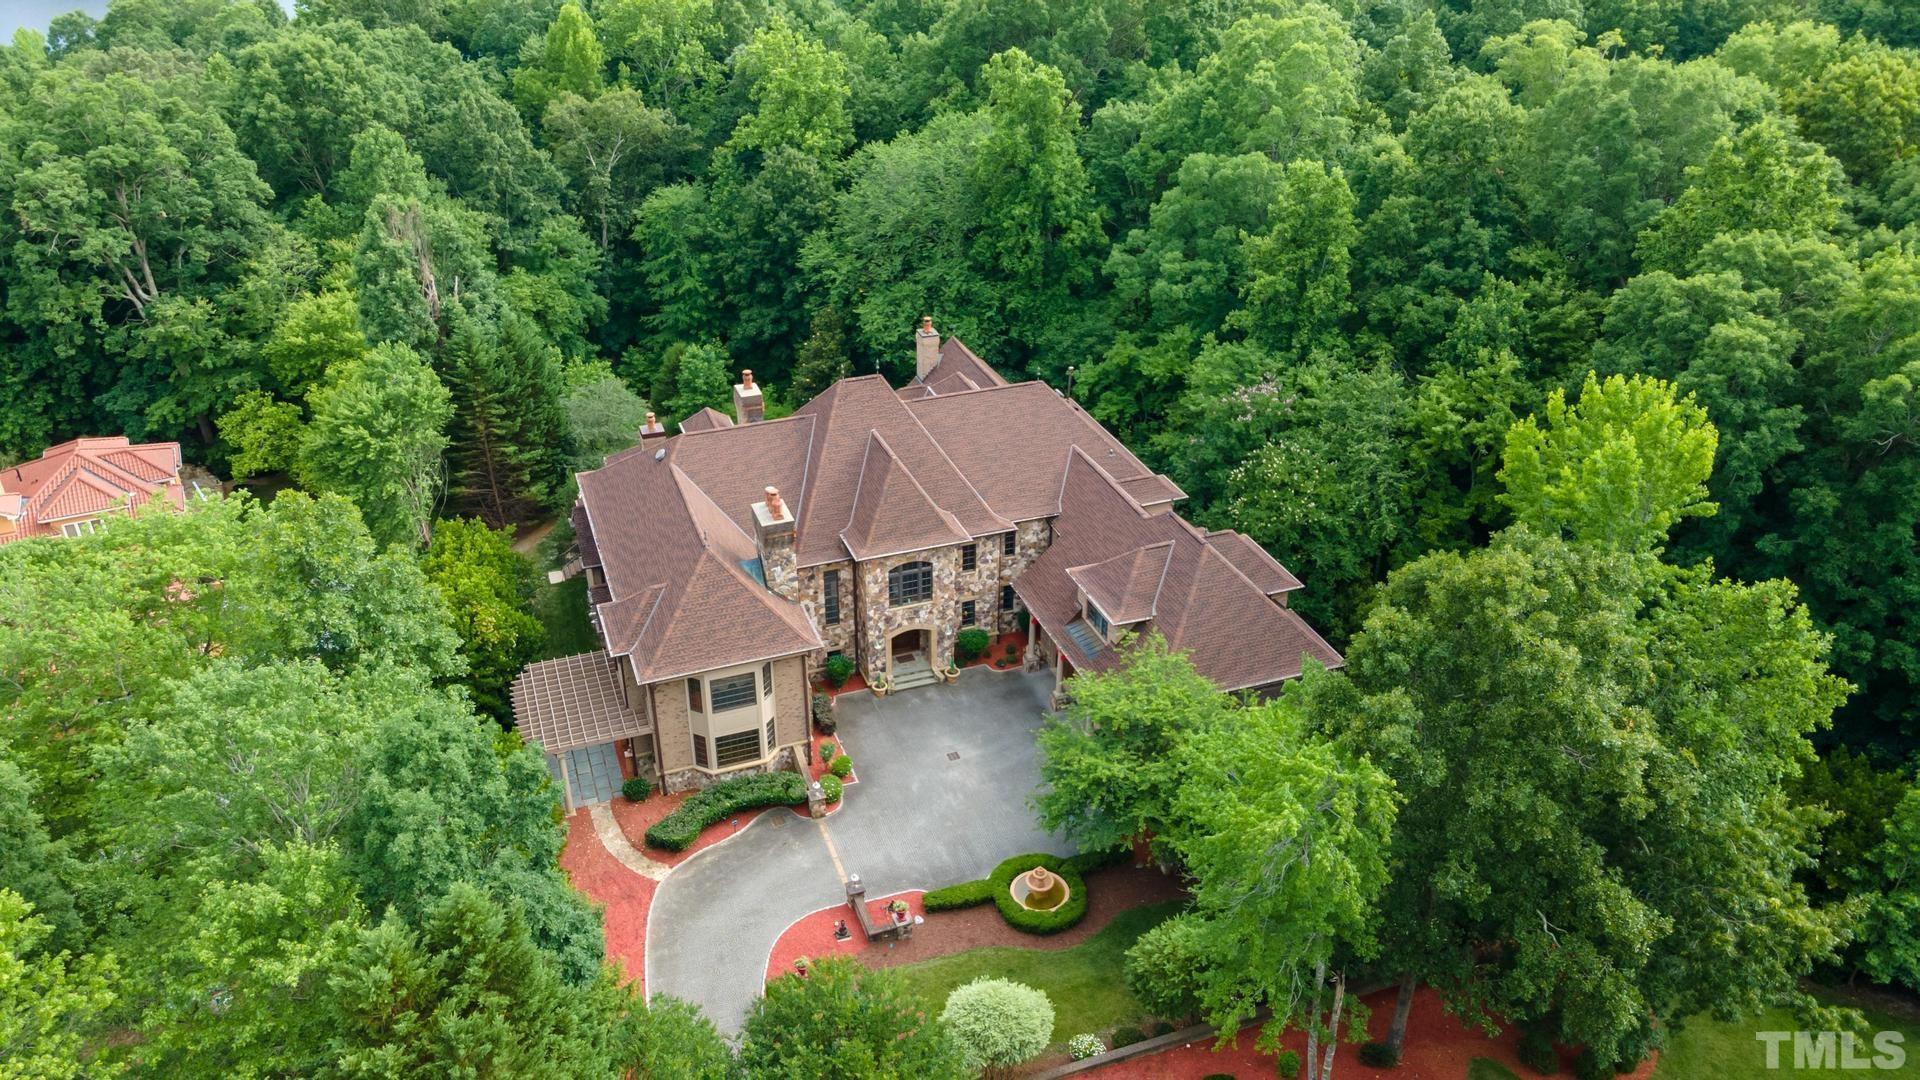 Enjoy privacy away from the bustling downtown Durham and relax in nature. Treyburn Golf Community is nestled in hundreds of acres of hardwoods and surrounds part of a lake made by the Little River. It is minutes from Eno River State park AND Falls Lake!